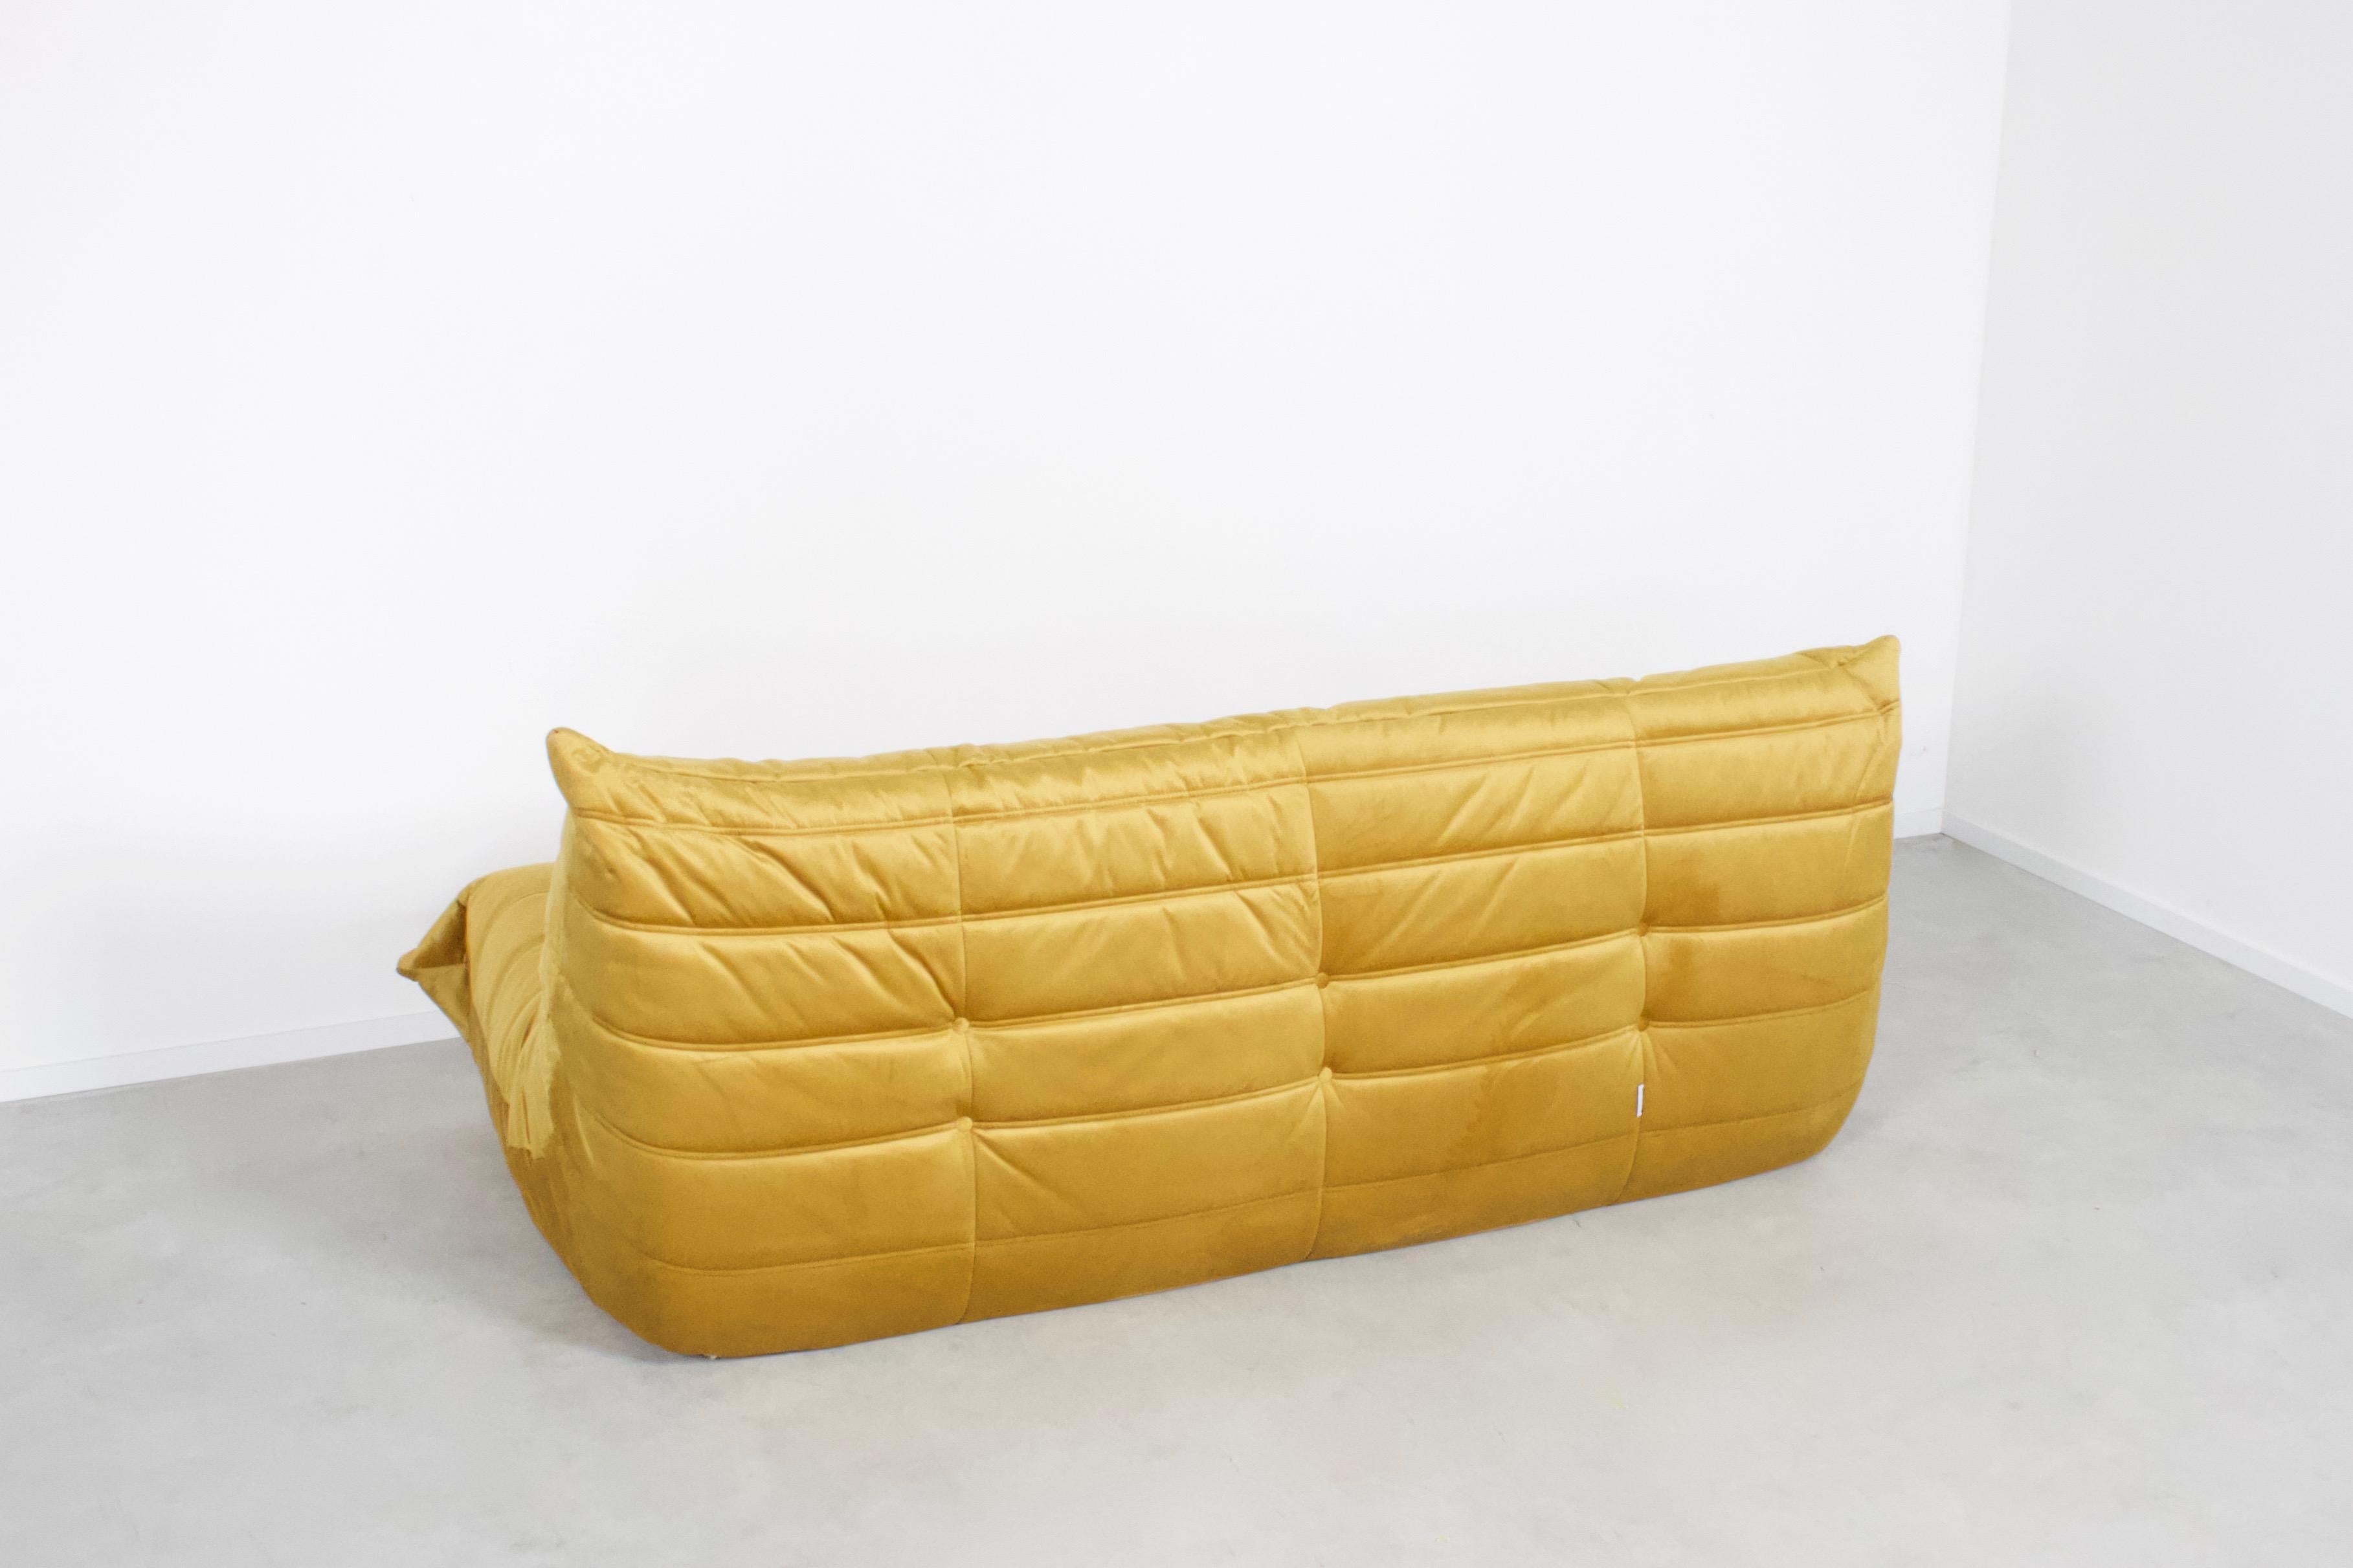 Togo three-seat by Michel Duraroy for Ligne Roset in excellent condition. 

Two sofas available

Reupholstered in a high quality gold colored velours which gives a beautiful and rich effect.

The Togo features an ergonomic design with multiple